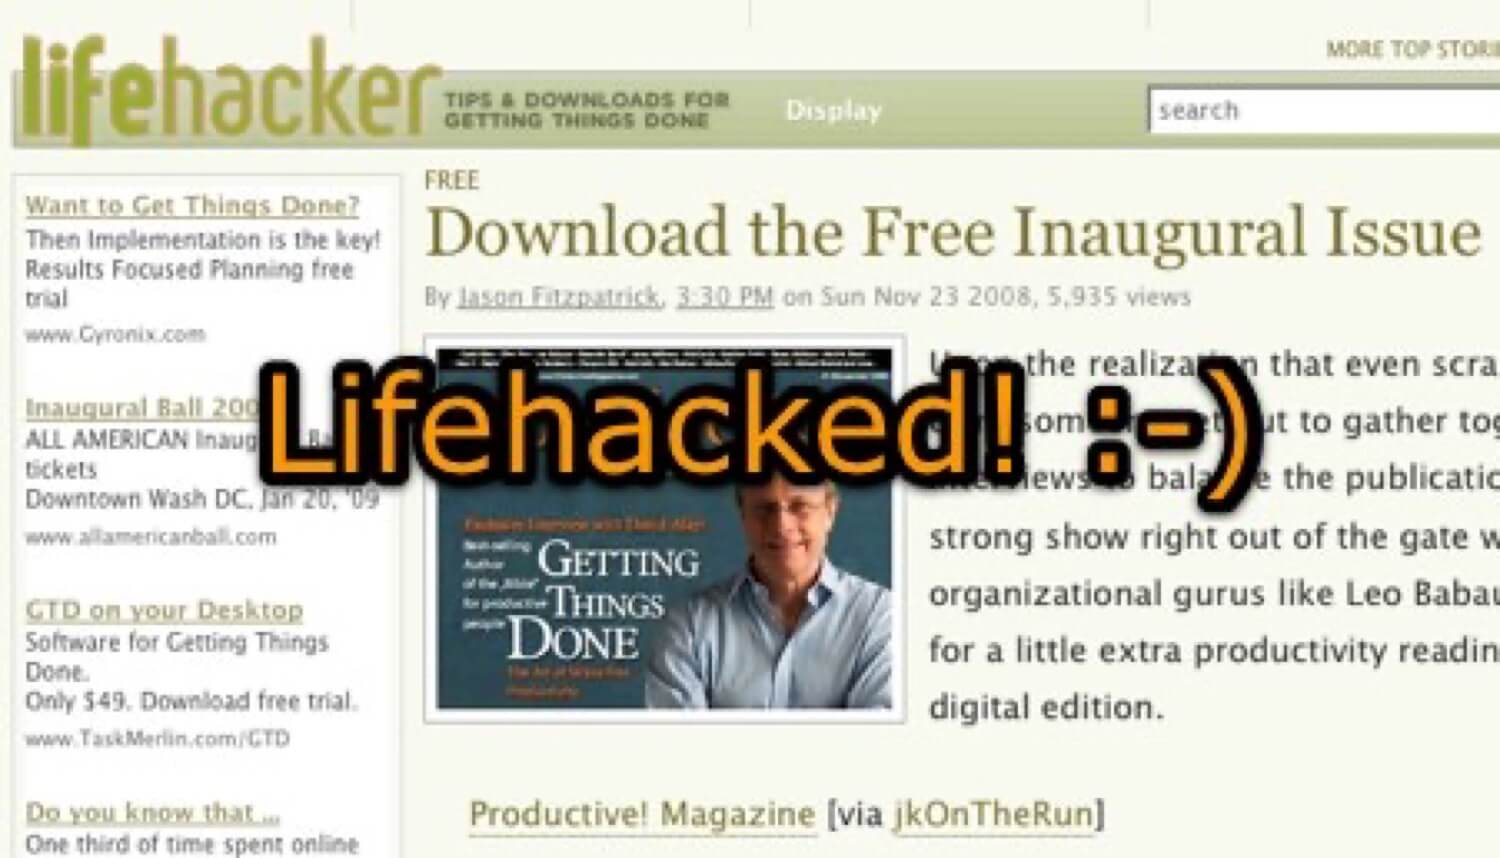 We’ve been Lifehacked… and it feels great!